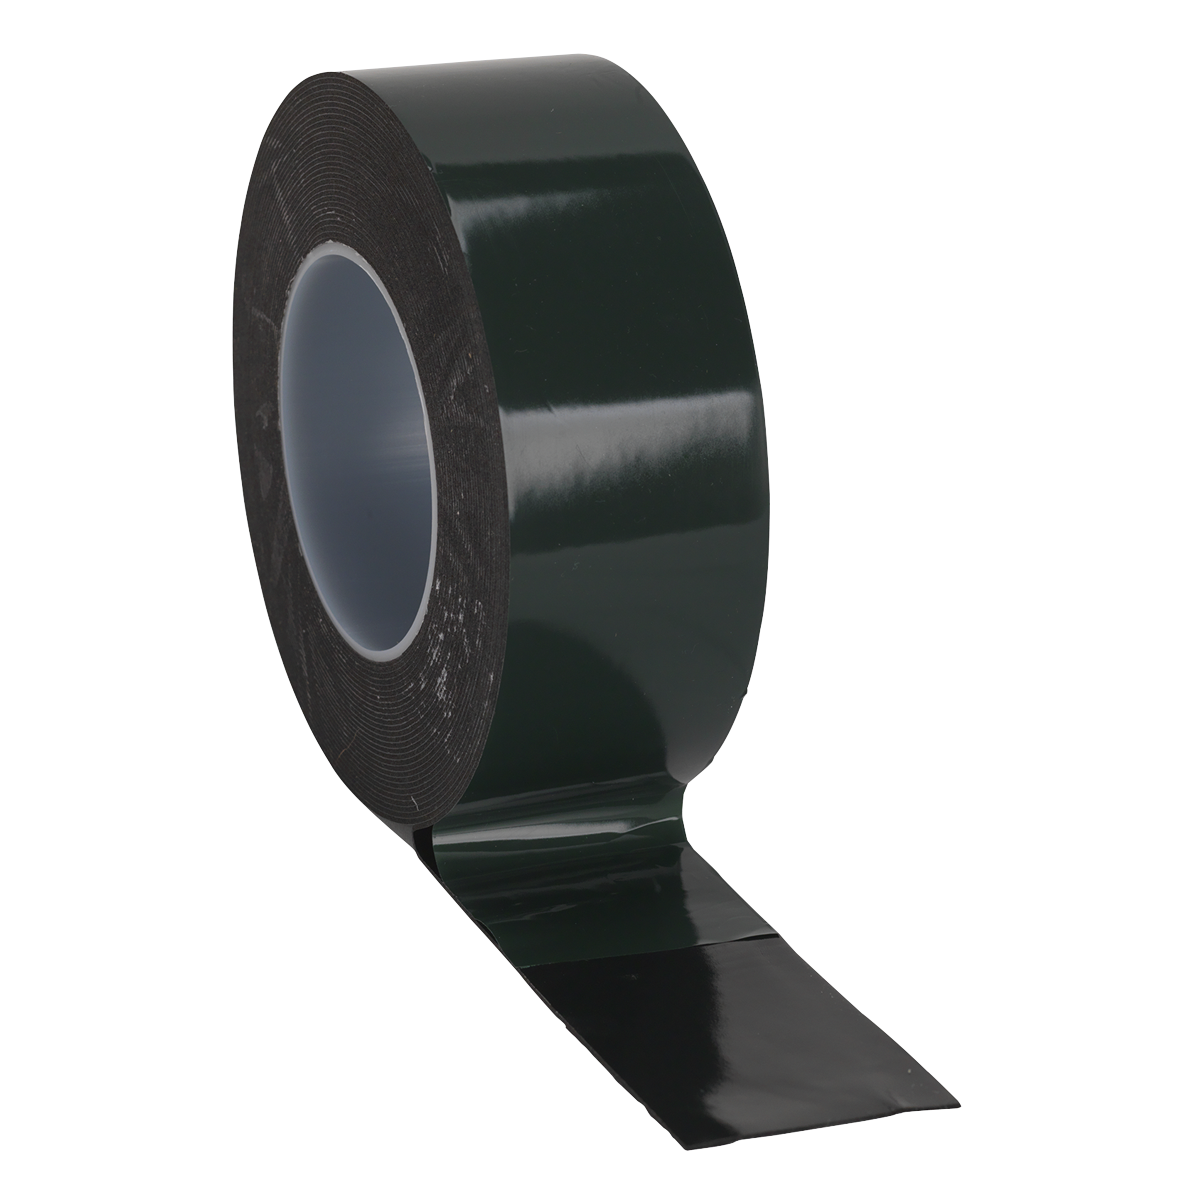 Double-Sided Adhesive Foam Tape 50mm x 10m Green Backing - DSTG5010 - Farming Parts